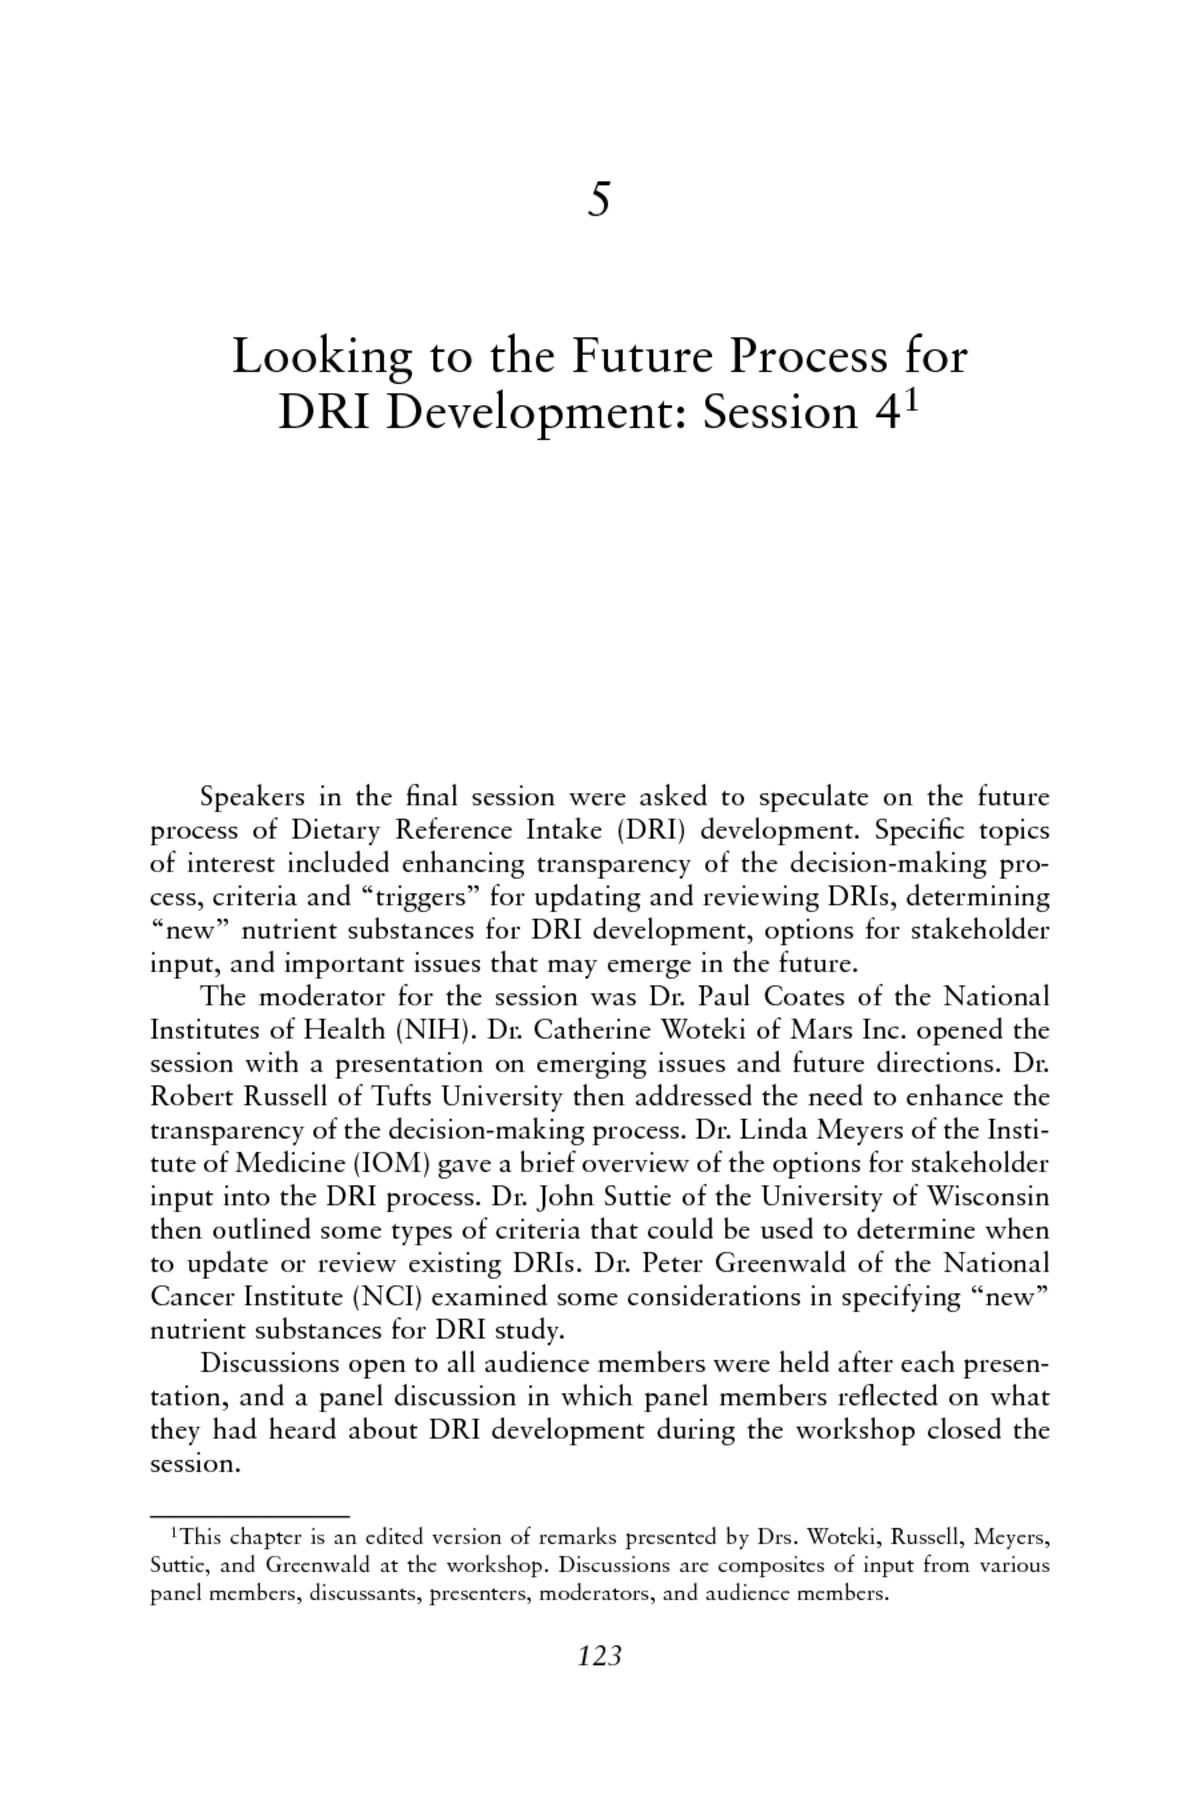 5 Looking To The Future Process For Dri Development Session 4 The Development Of Dris 1994 04 Lessons Learned And New Challenges Workshop Summary The National Academies Press